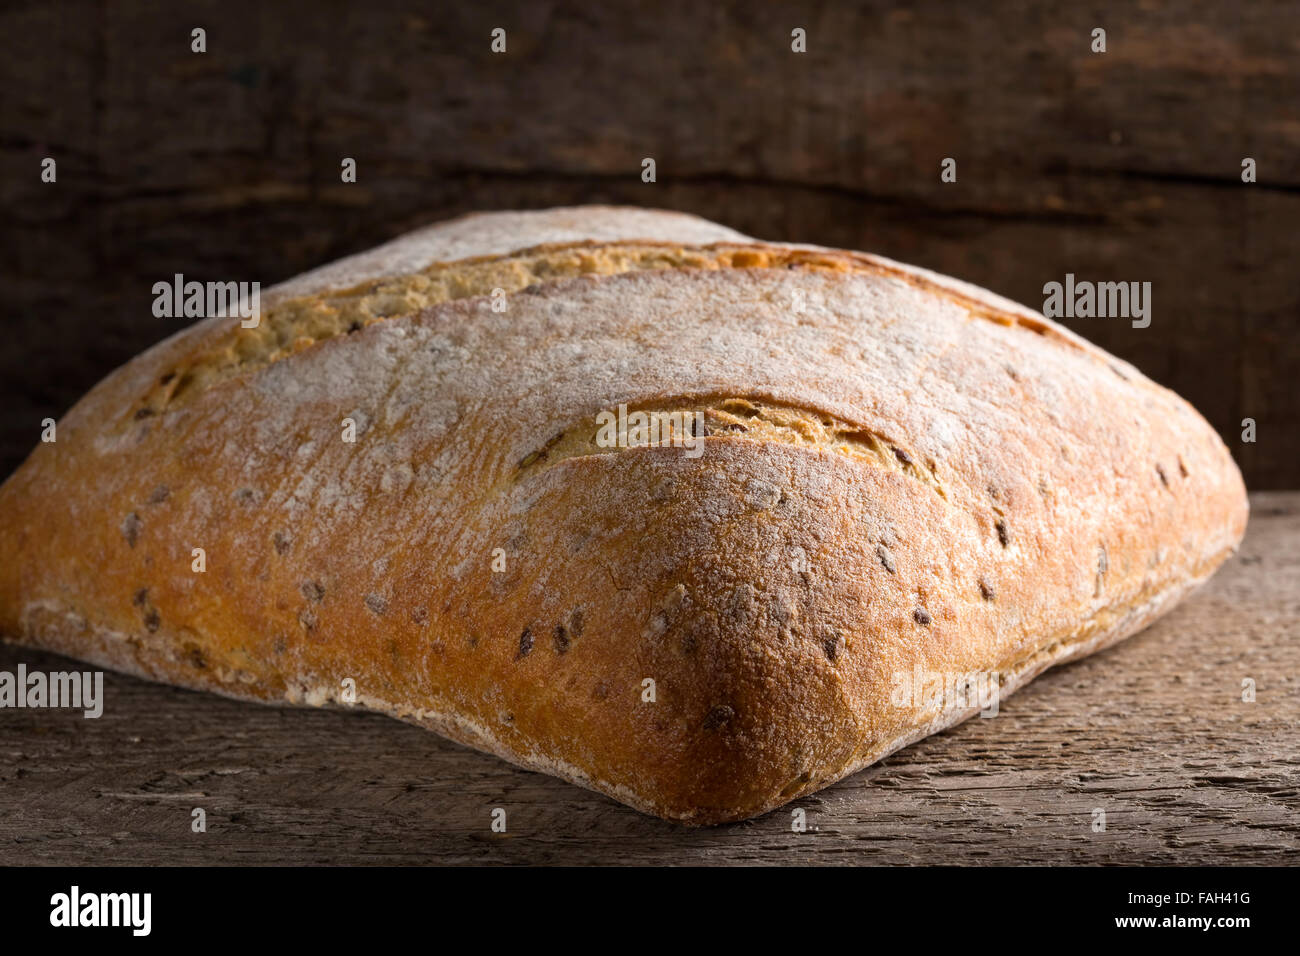 Homemade fresh baked bread loaf over rustic wooden background Stock Photo